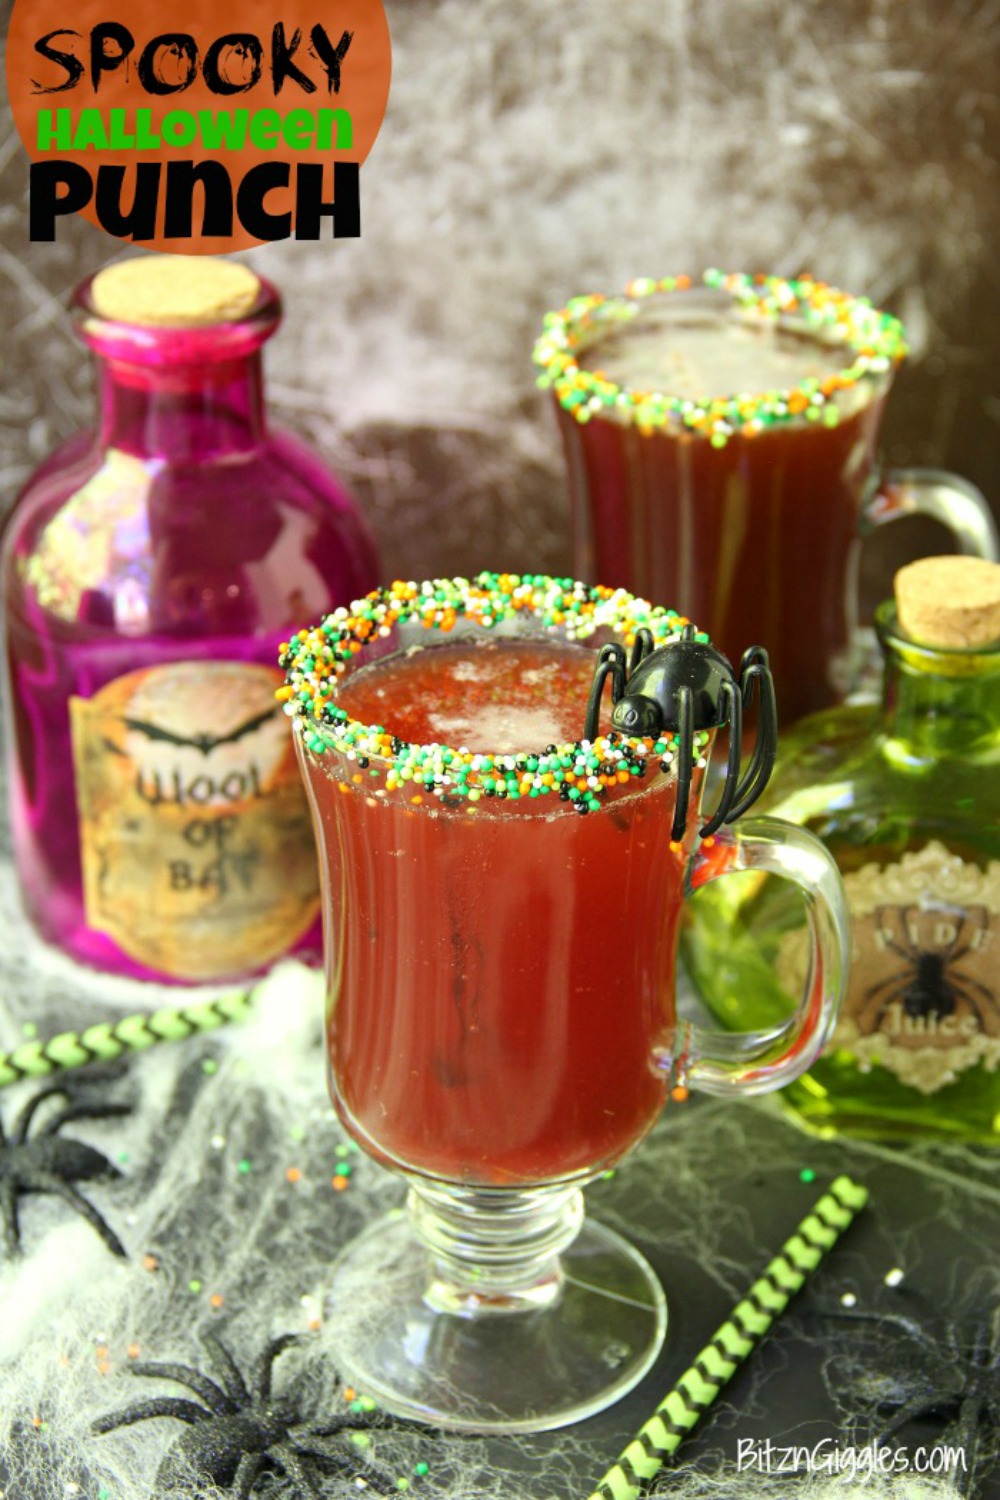 Spooky Halloween Punch - This Halloween punch is only three ingredients! When served in a nonpareil-rimmed glass, the color of the candy starts dripping eerily into the punch, creating fun black streaks and darkening the color of the drink!